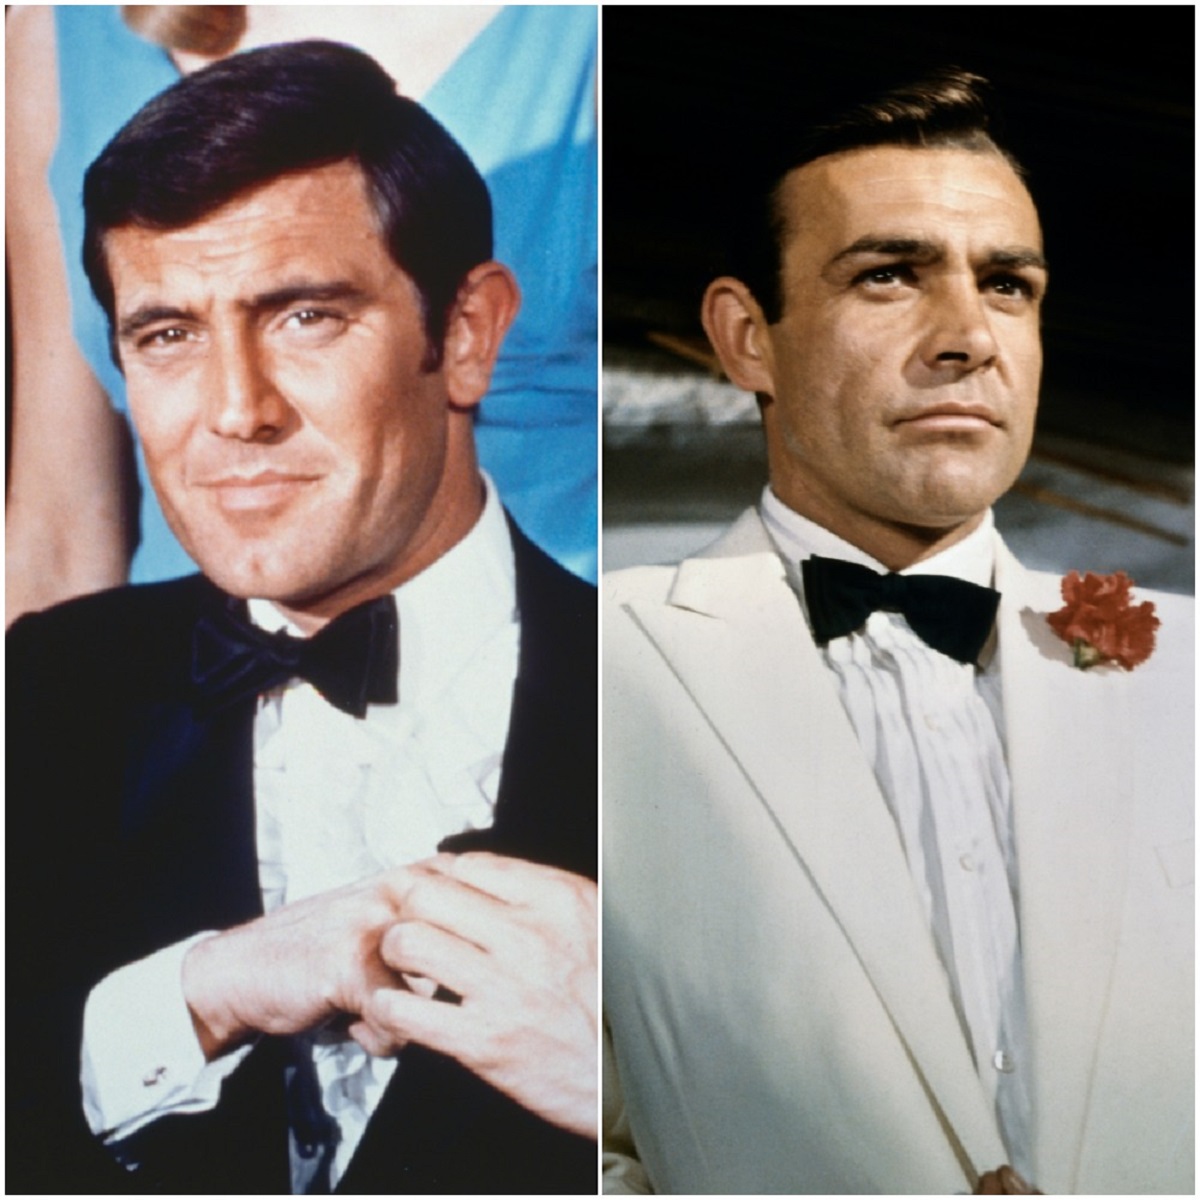 (L) George Lazenby as James Bond in 'On Her Majesty's Secret Service,' (R) Sean Connery as James Bond in Goldfinger